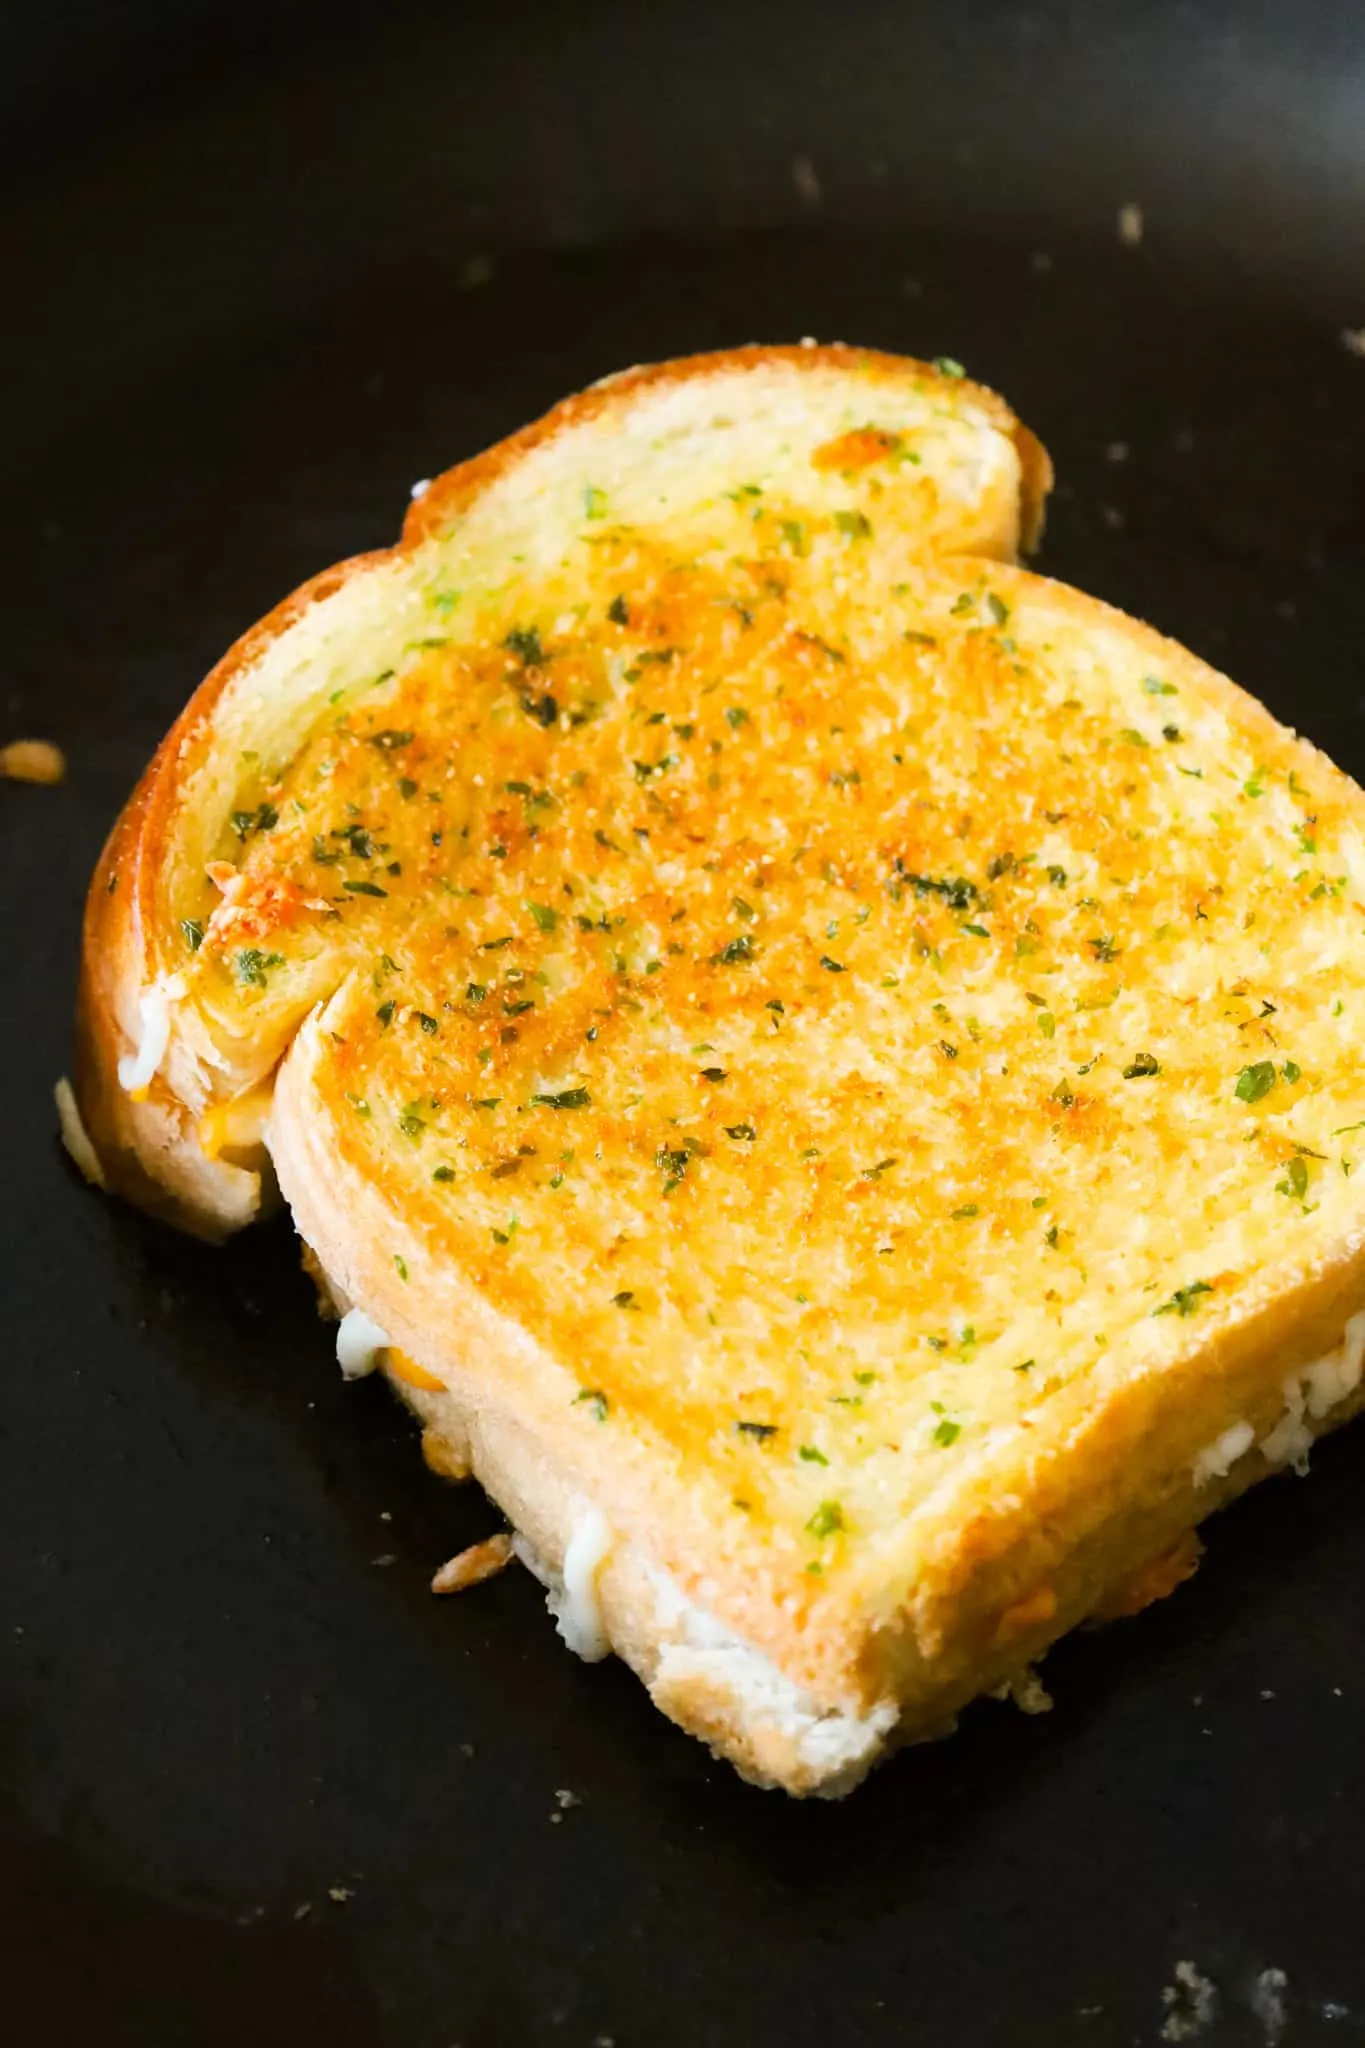 Garlic Bread Grilled Cheese is an easy lunch or dinner recipe with garlic buttered bread filled with gooey mozzarella and cheddar cheese.